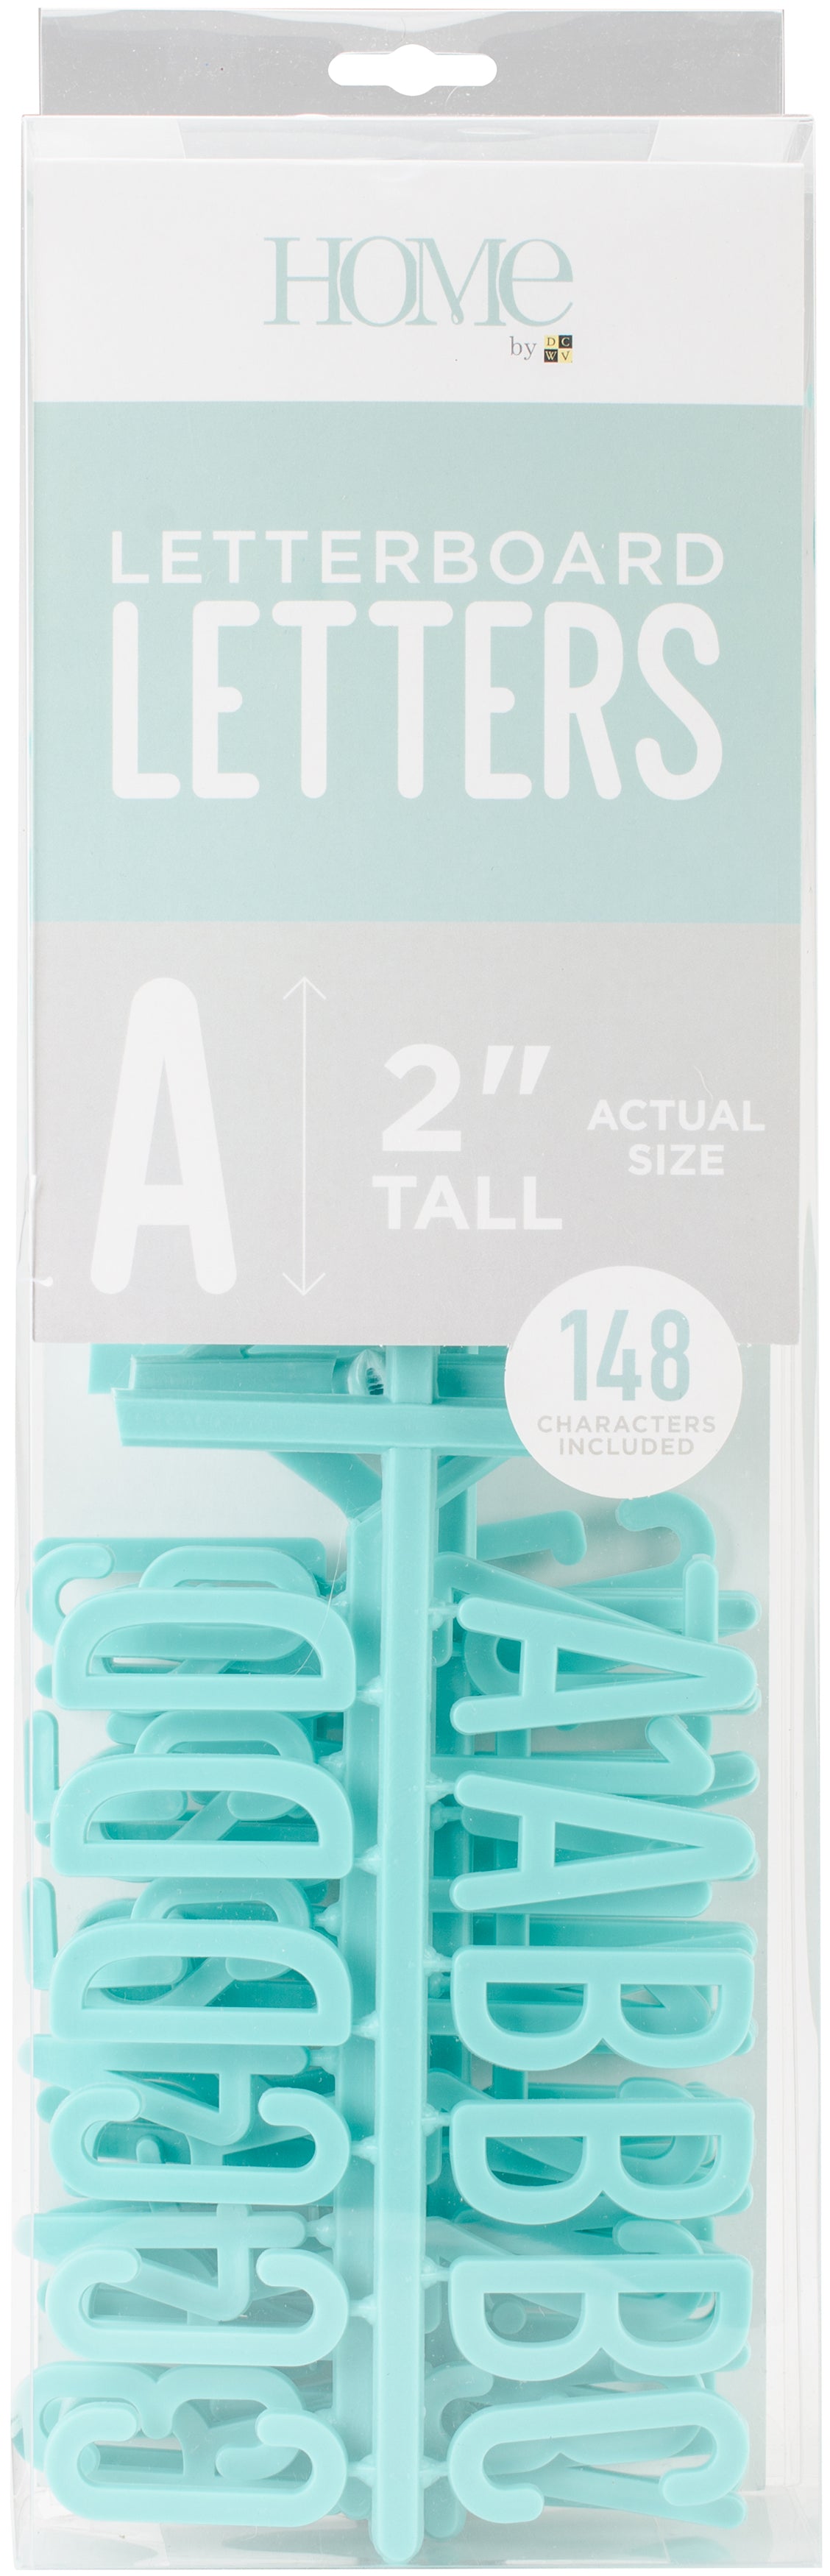 DCWV Letterboard Letters & Characters 2" 148/Pkg-Teal